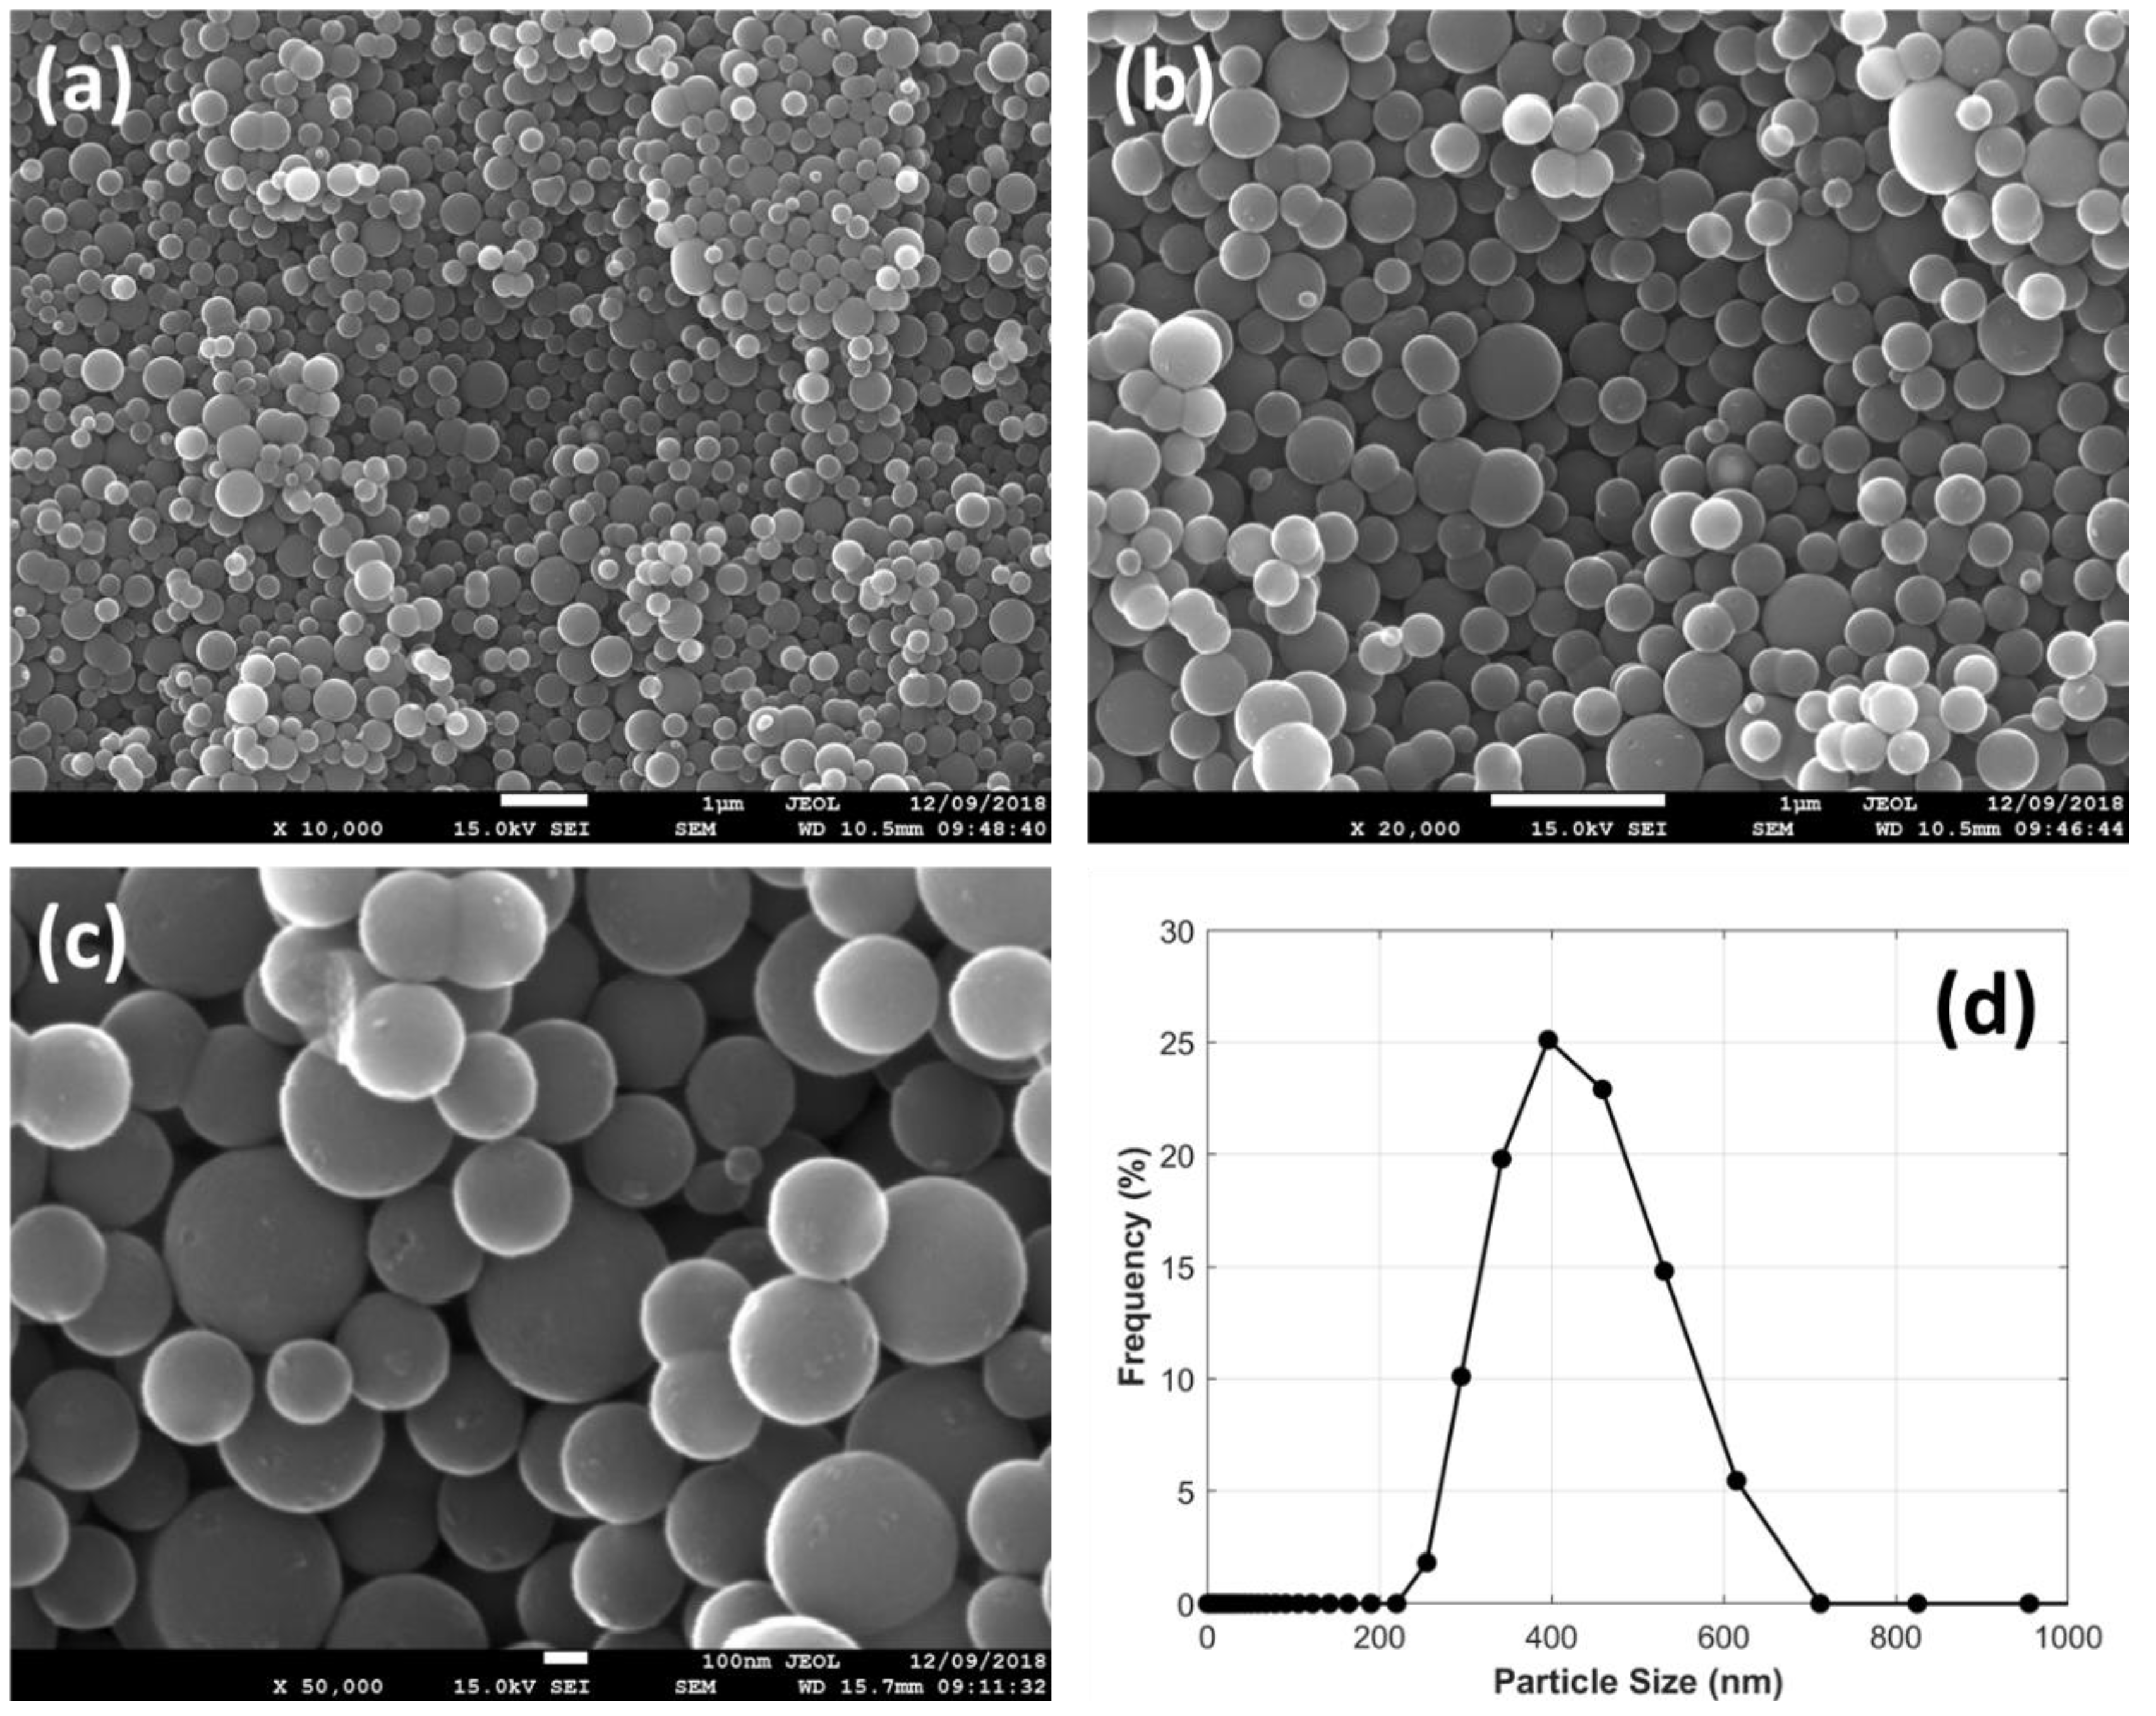 Lubricants | Free Full-Text | Experimental Investigation of the Mechanical  and Surface Properties of Sub-Micron Carbon Spheres